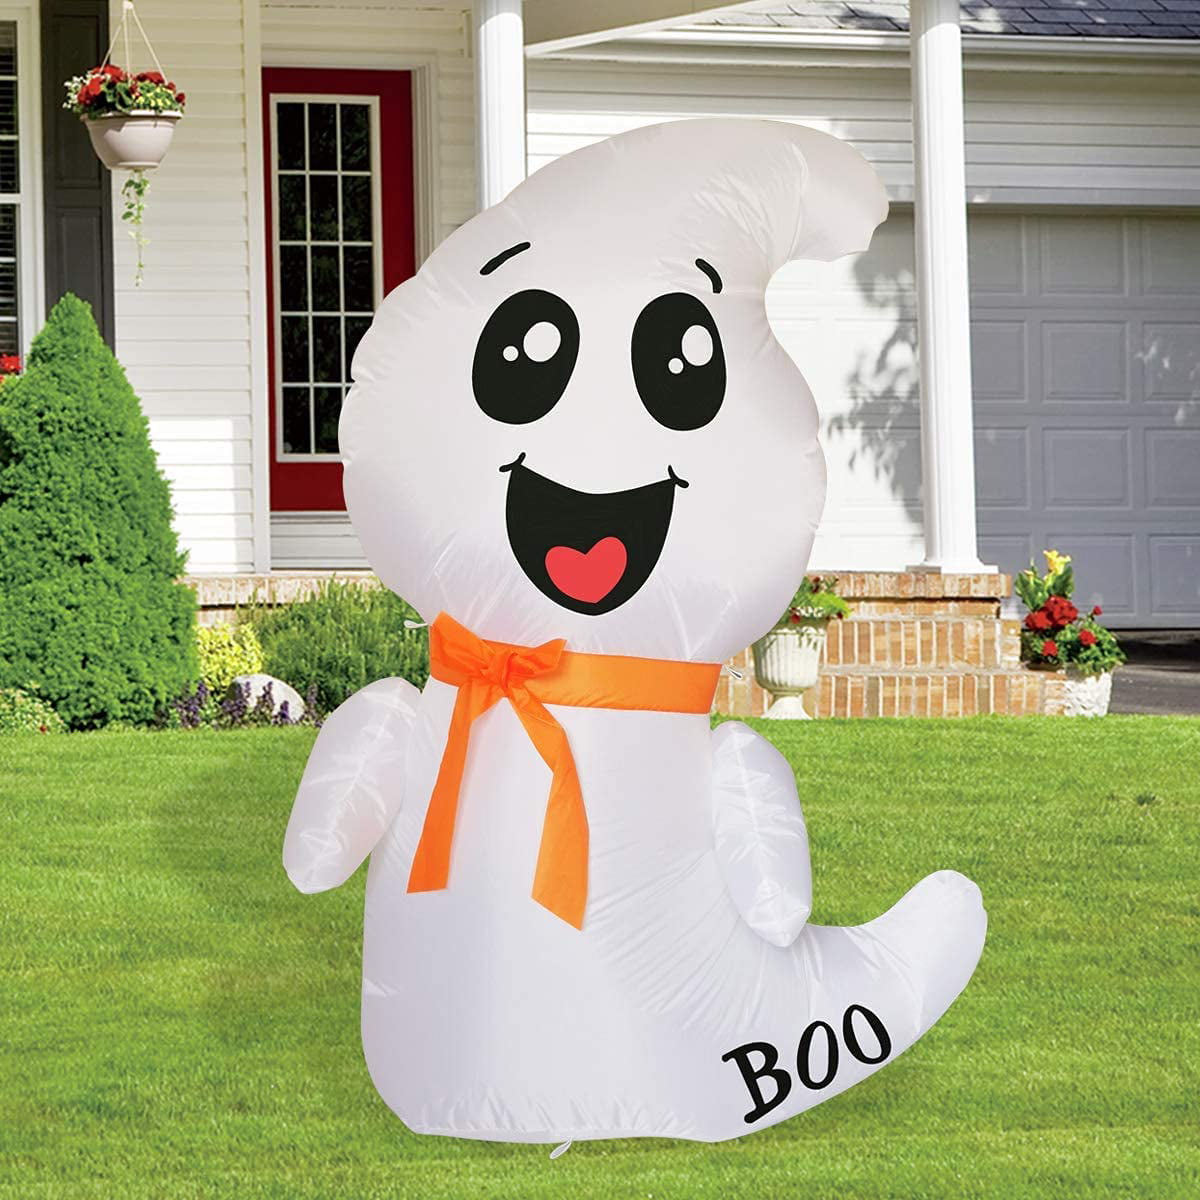 Halloween Inflatable Decoration 4ft Hanging Happy Ghost with Built-in Bright LED Light Blow-up Yard Decoration COMIN Halloween Inflatables for Party/Indoor/Outdoor/Yard/Garden/Lawn Decoration 